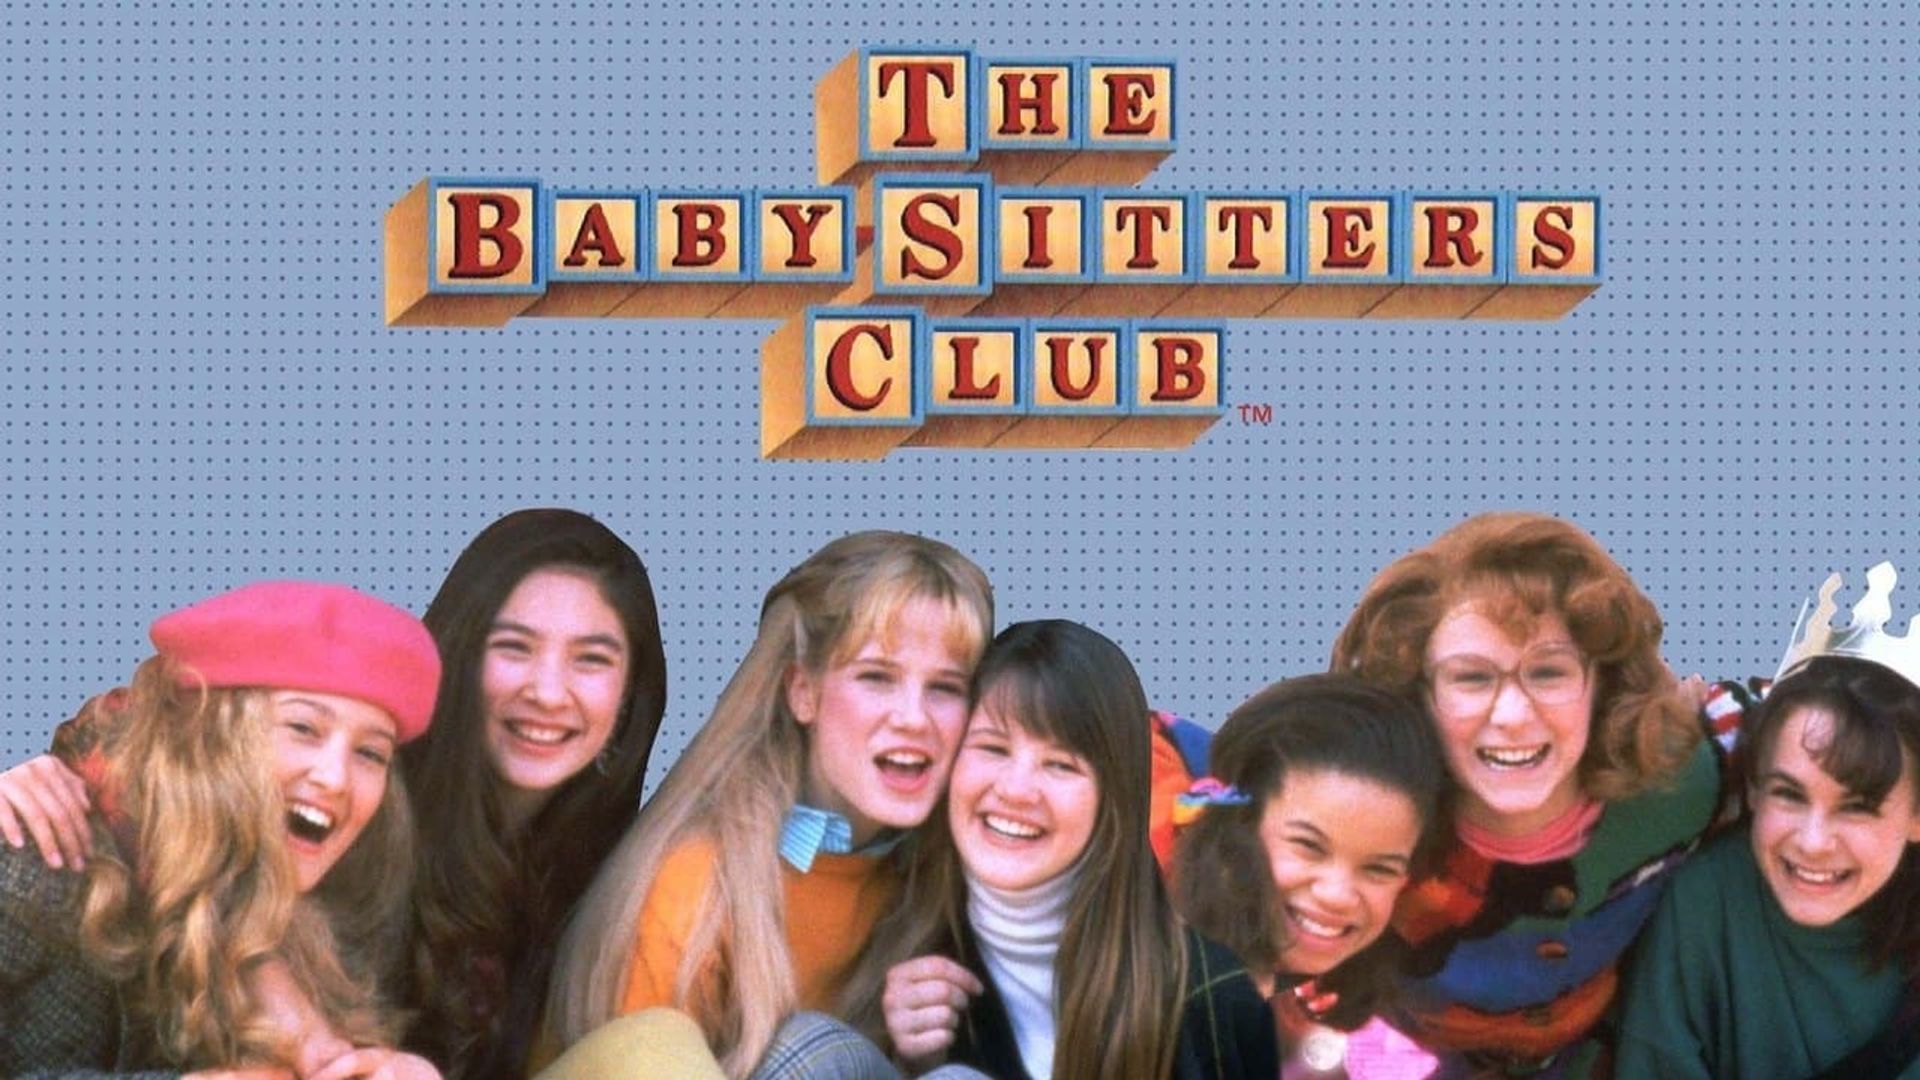 The Baby-Sitters Club background